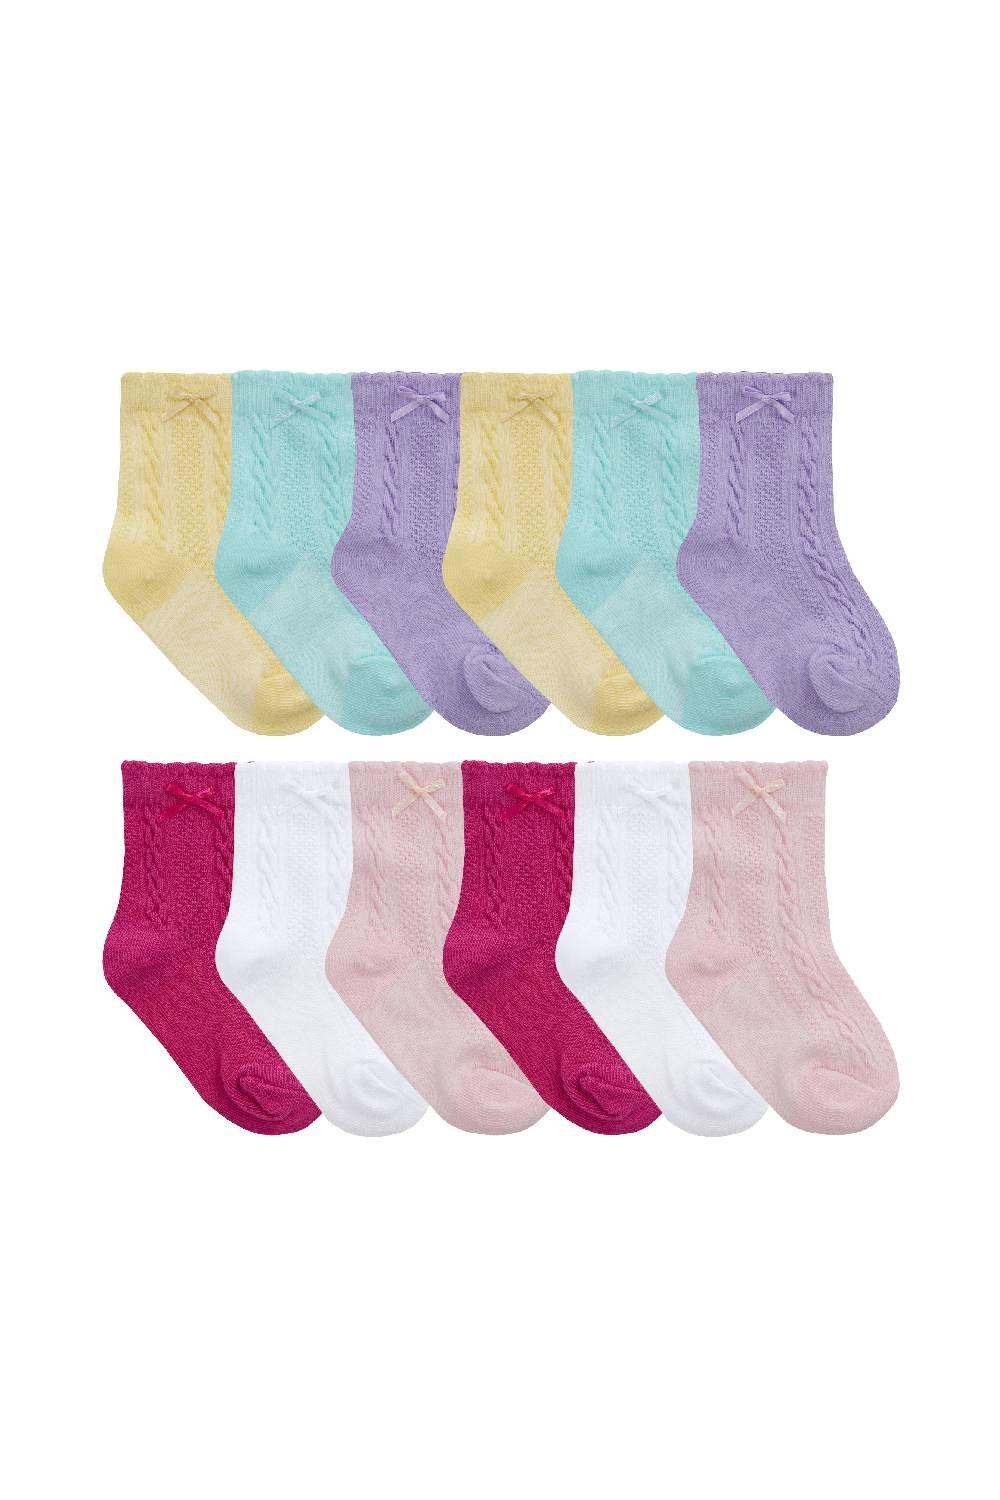 12 Pairs Babies Cute Bow Cable Knit Pattern Soft Cotton Socks